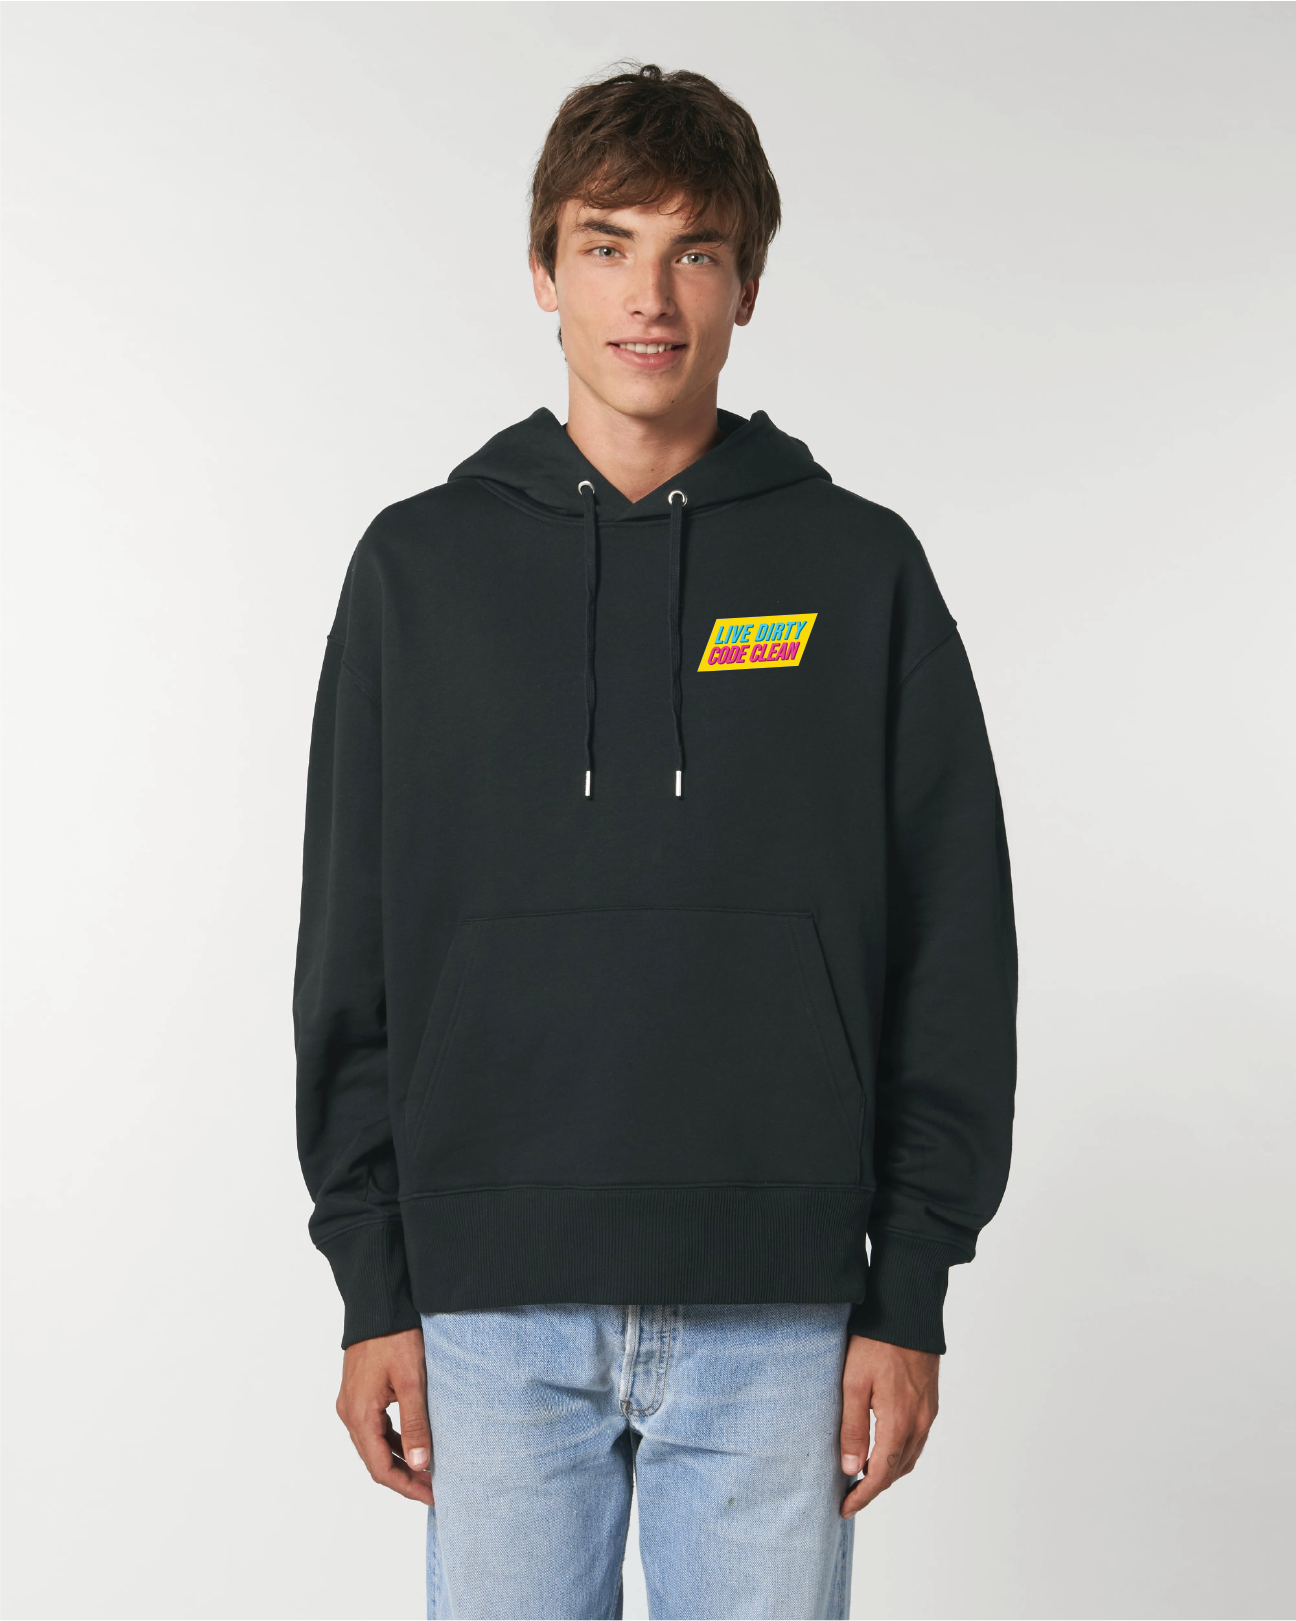 Men wearing a Coder / Programmer hoodie with the "Live Dirty, Code Clean" Design